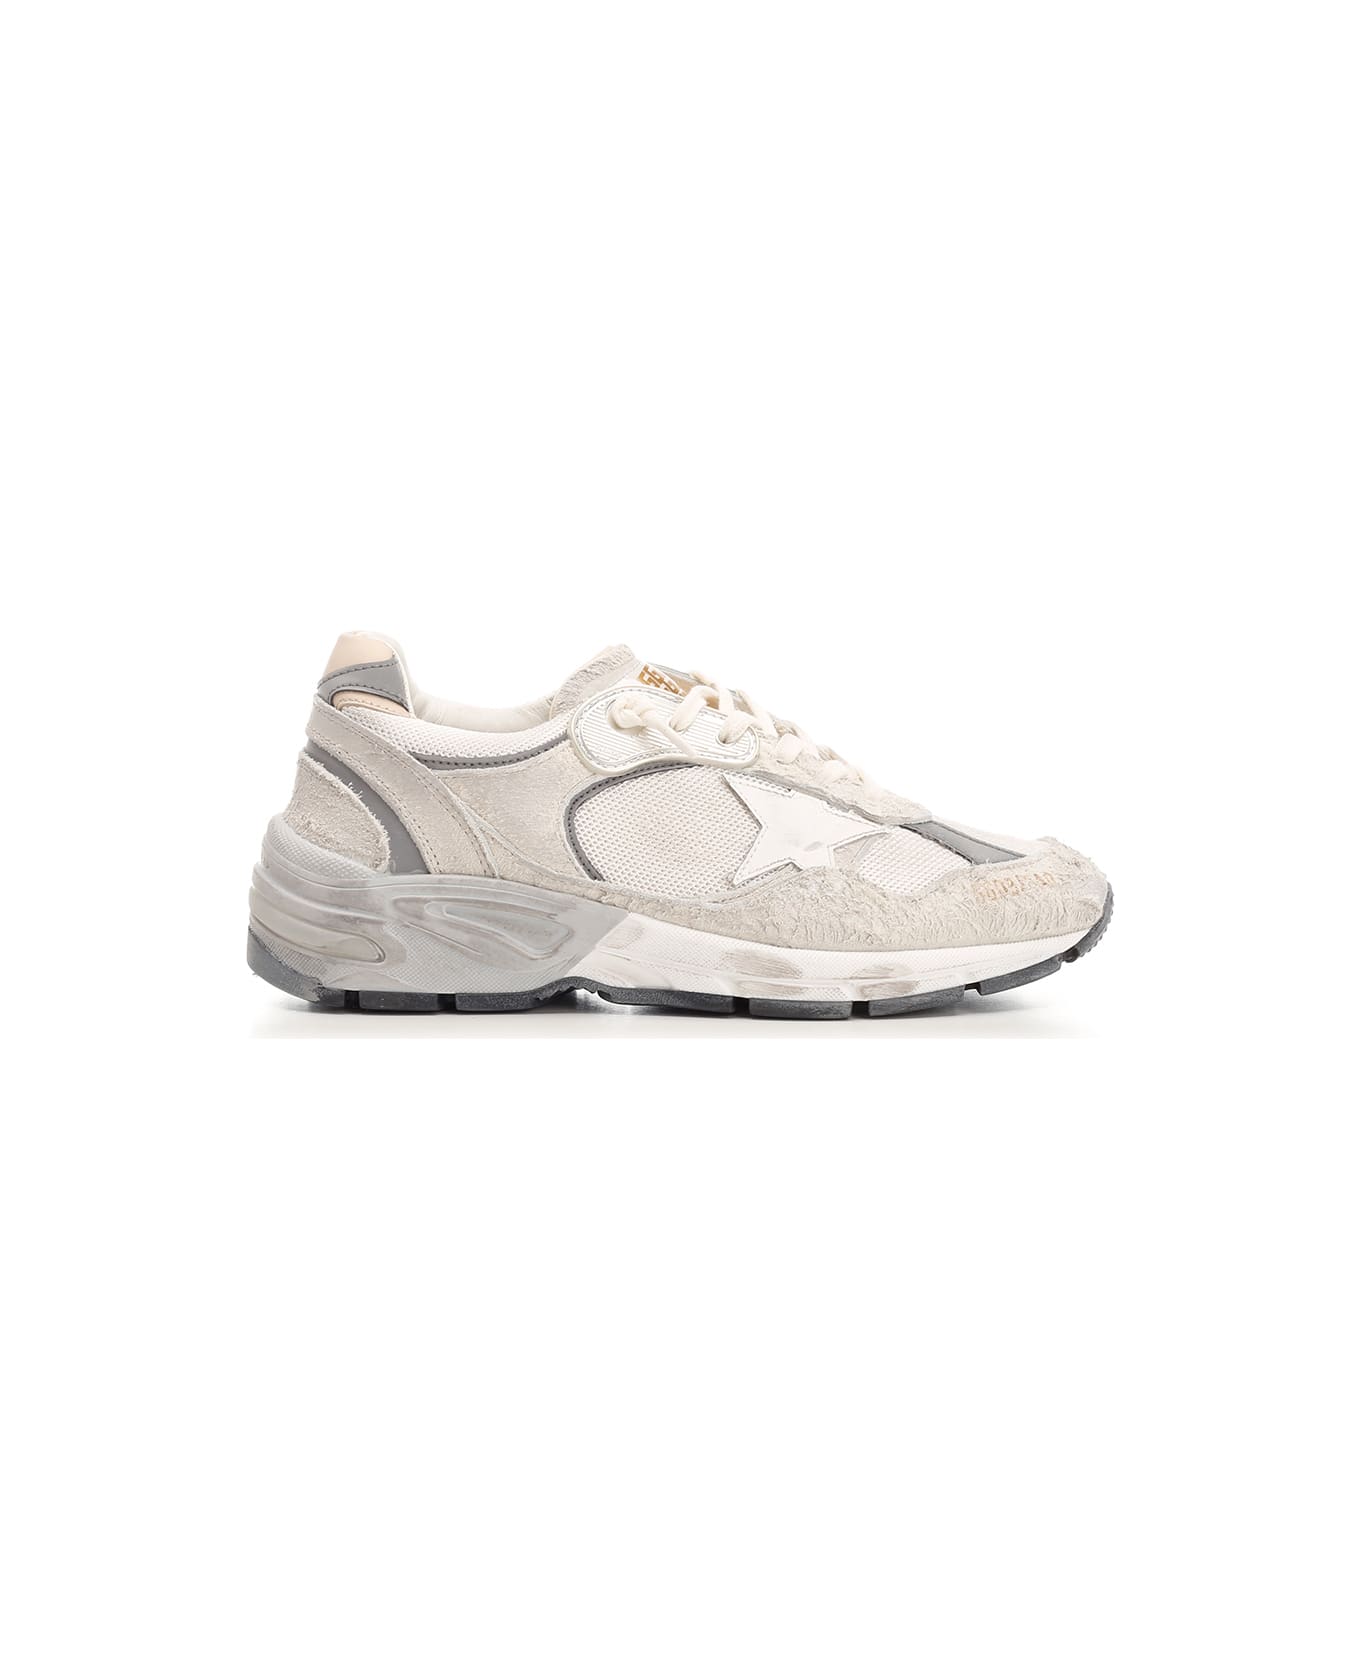 Golden Goose Running Dad Sneakers - White/Silver